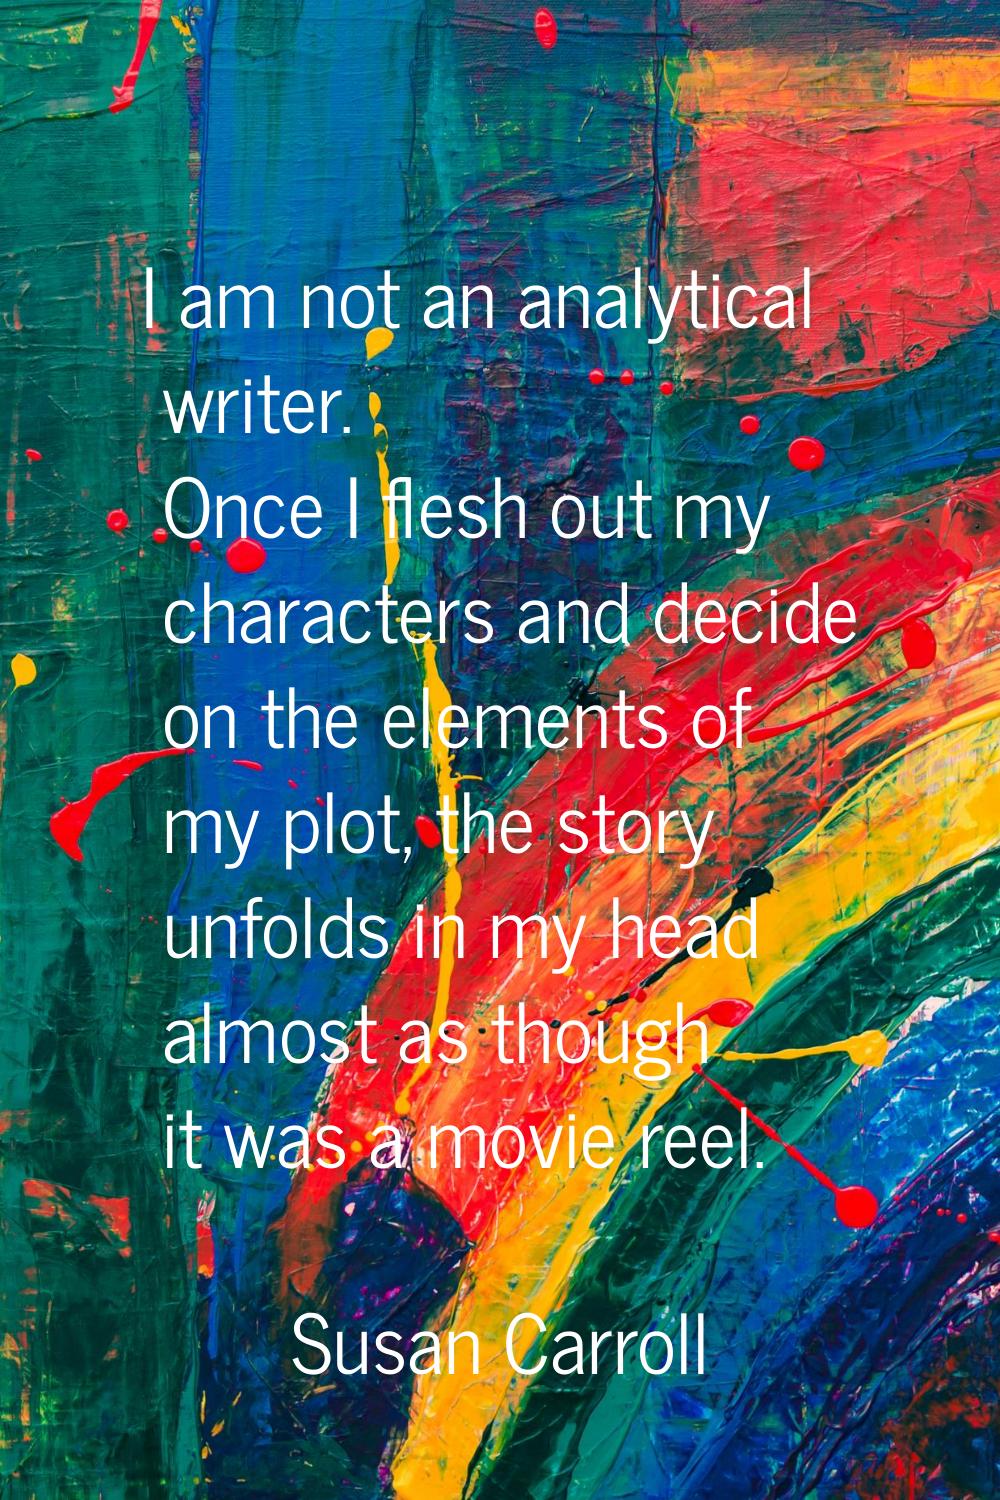 I am not an analytical writer. Once I flesh out my characters and decide on the elements of my plot